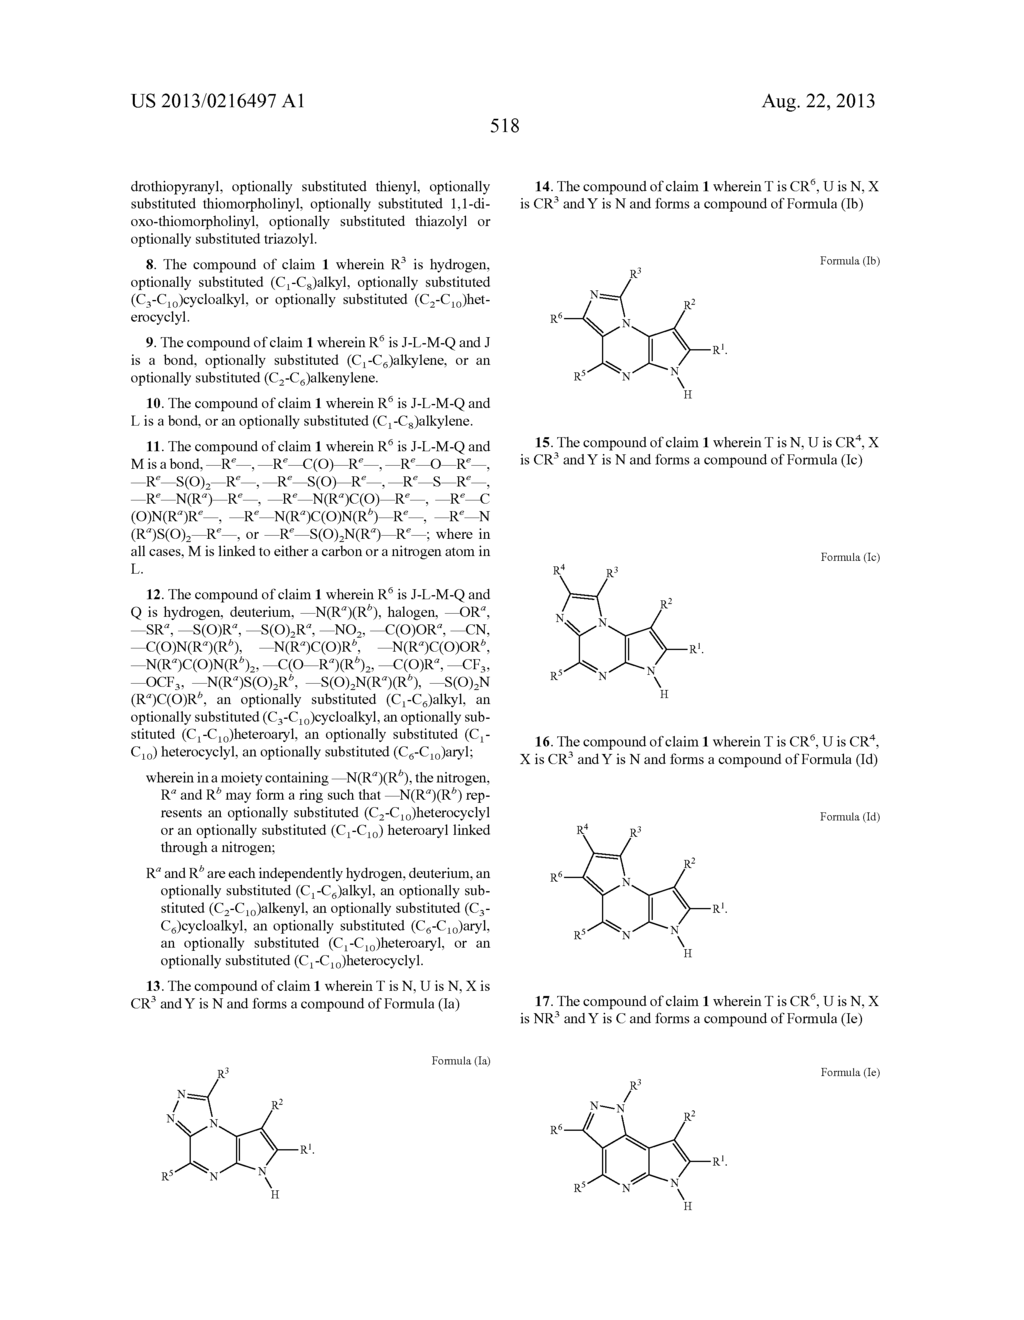 NOVEL TRICYCLIC COMPOUNDS - diagram, schematic, and image 519